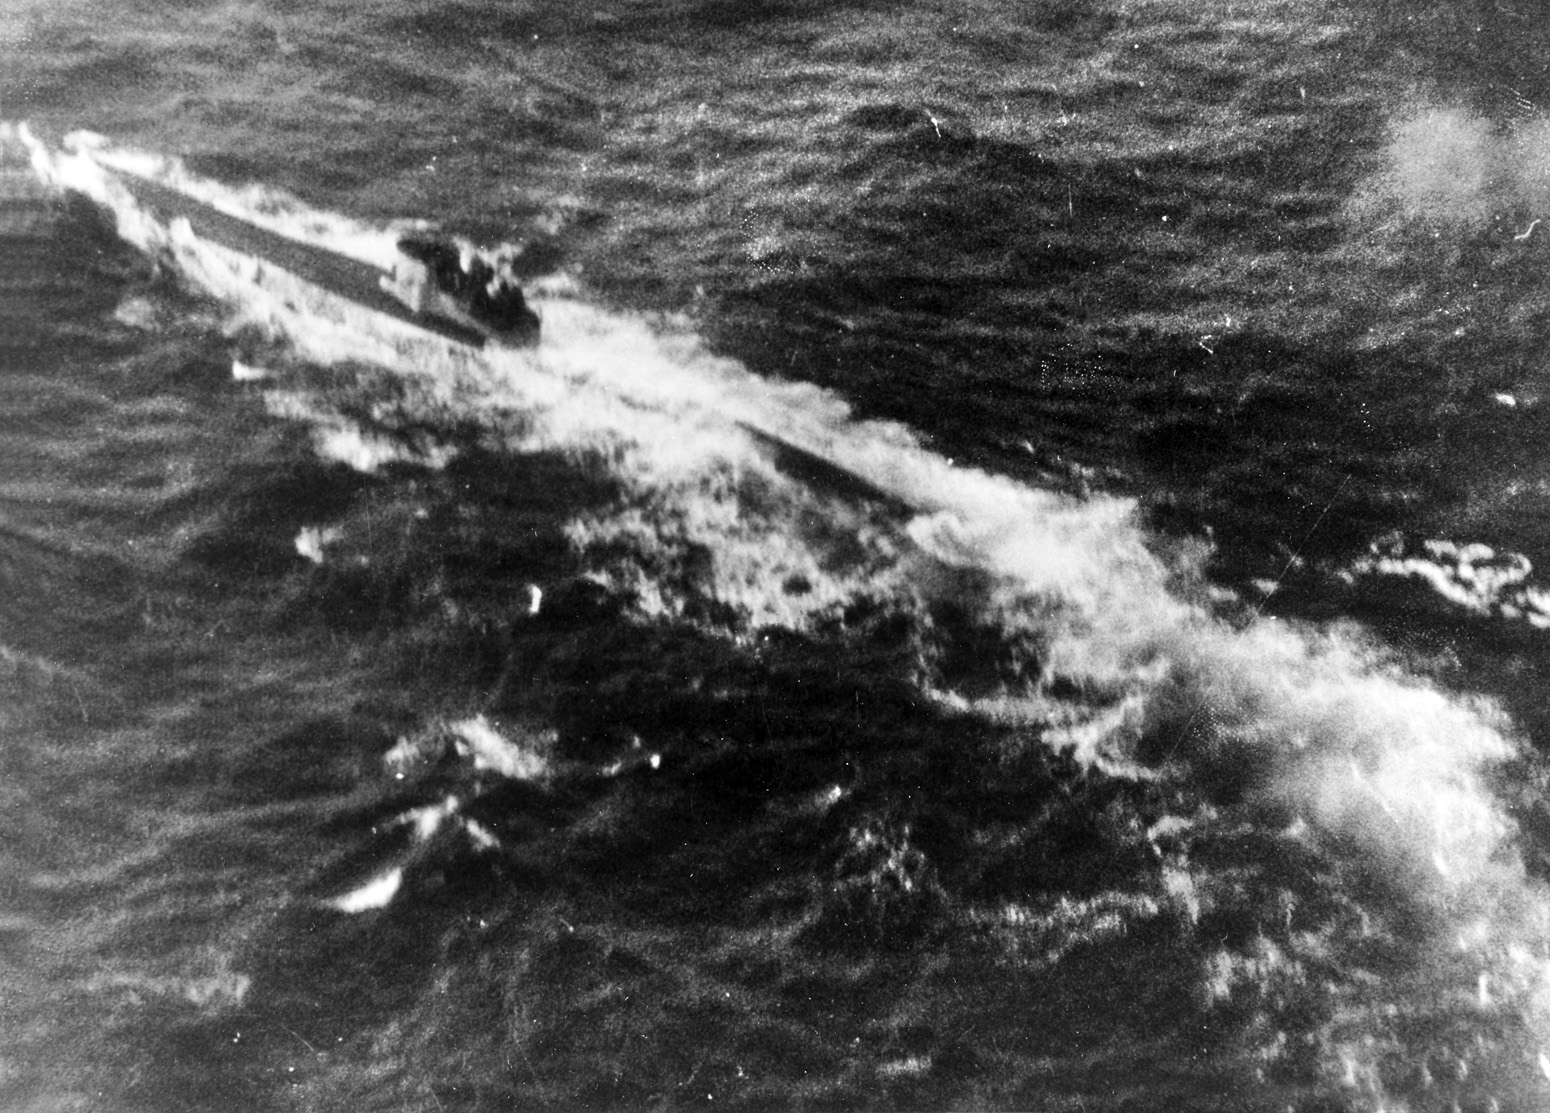 As World War II progressed, Allied anti-submarine defenses improved steadily, inflicting heavy losses on German U-boats in the Atlantic. In this photo, a submarine believed to be U-402 is shown under intense air attack in October 1943. 